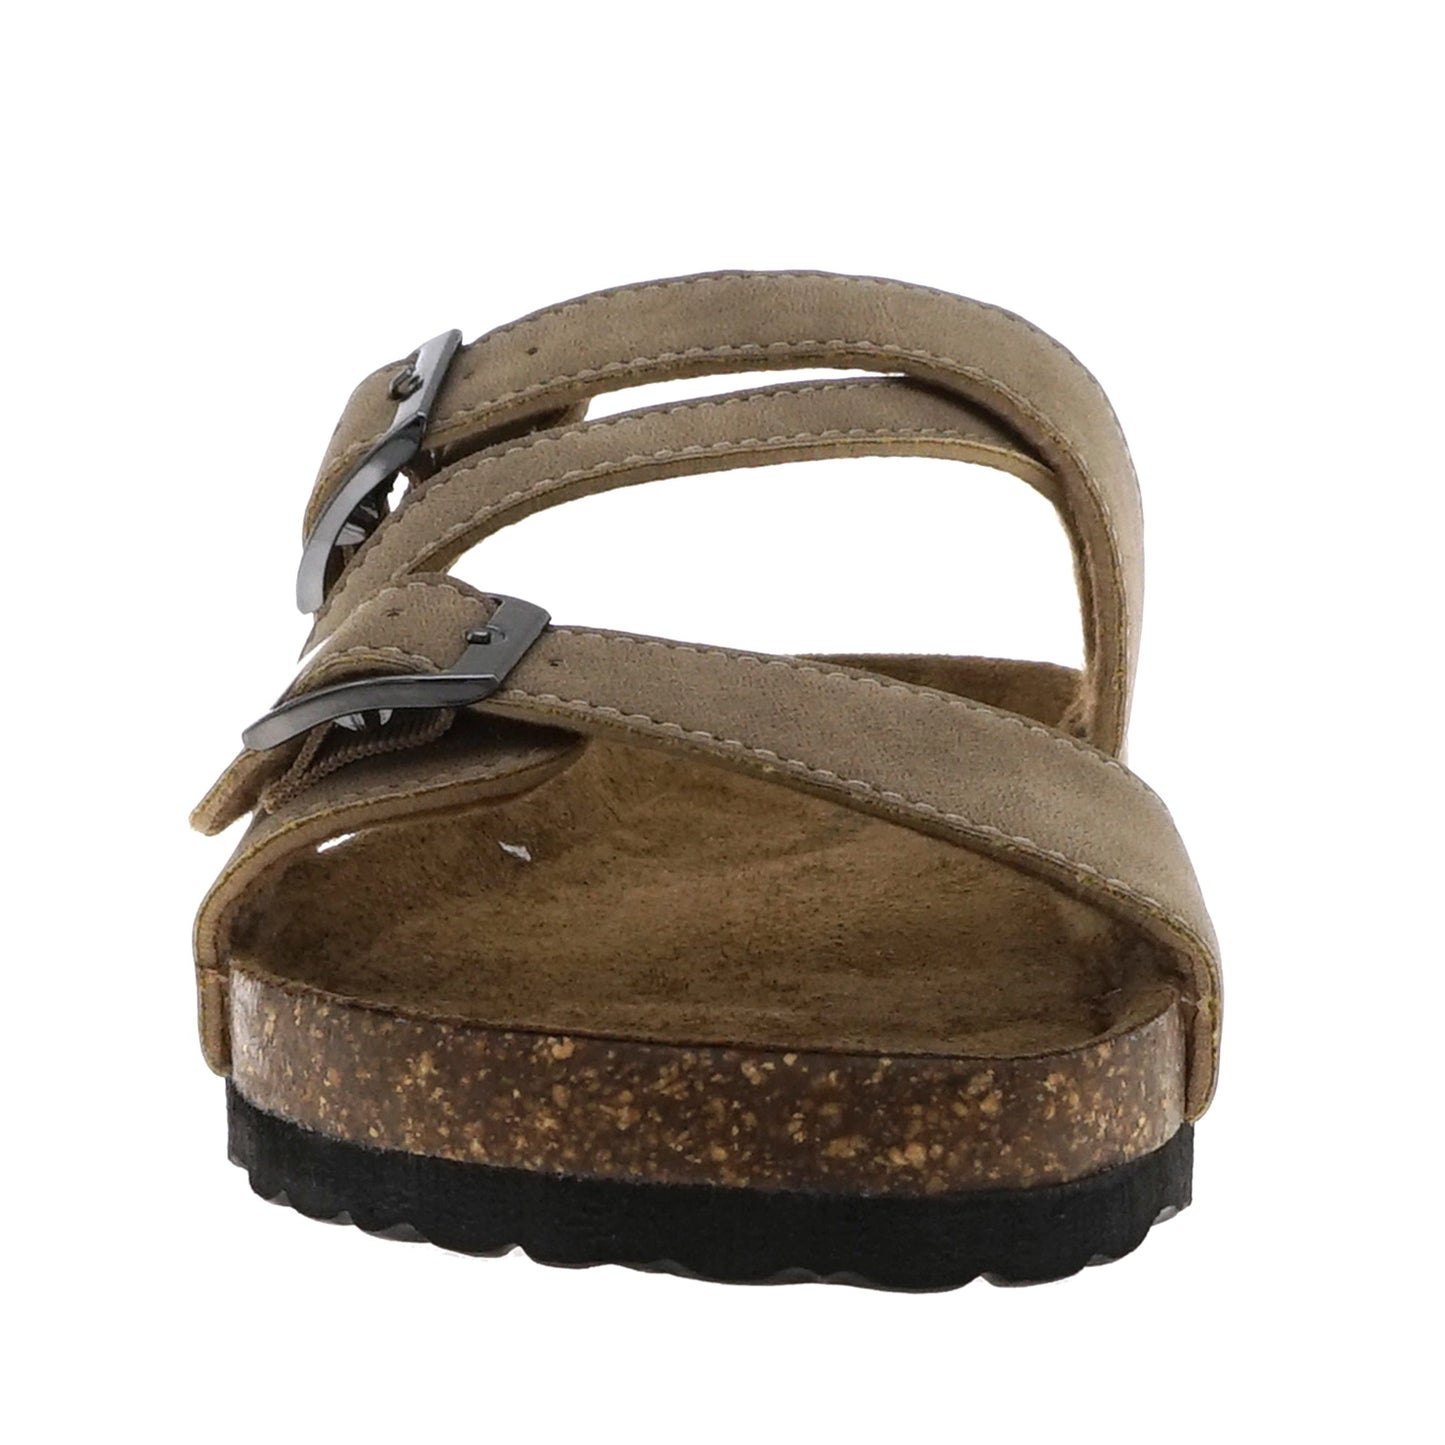 Outwoods Bork-56 Strappy Buckle Sandal